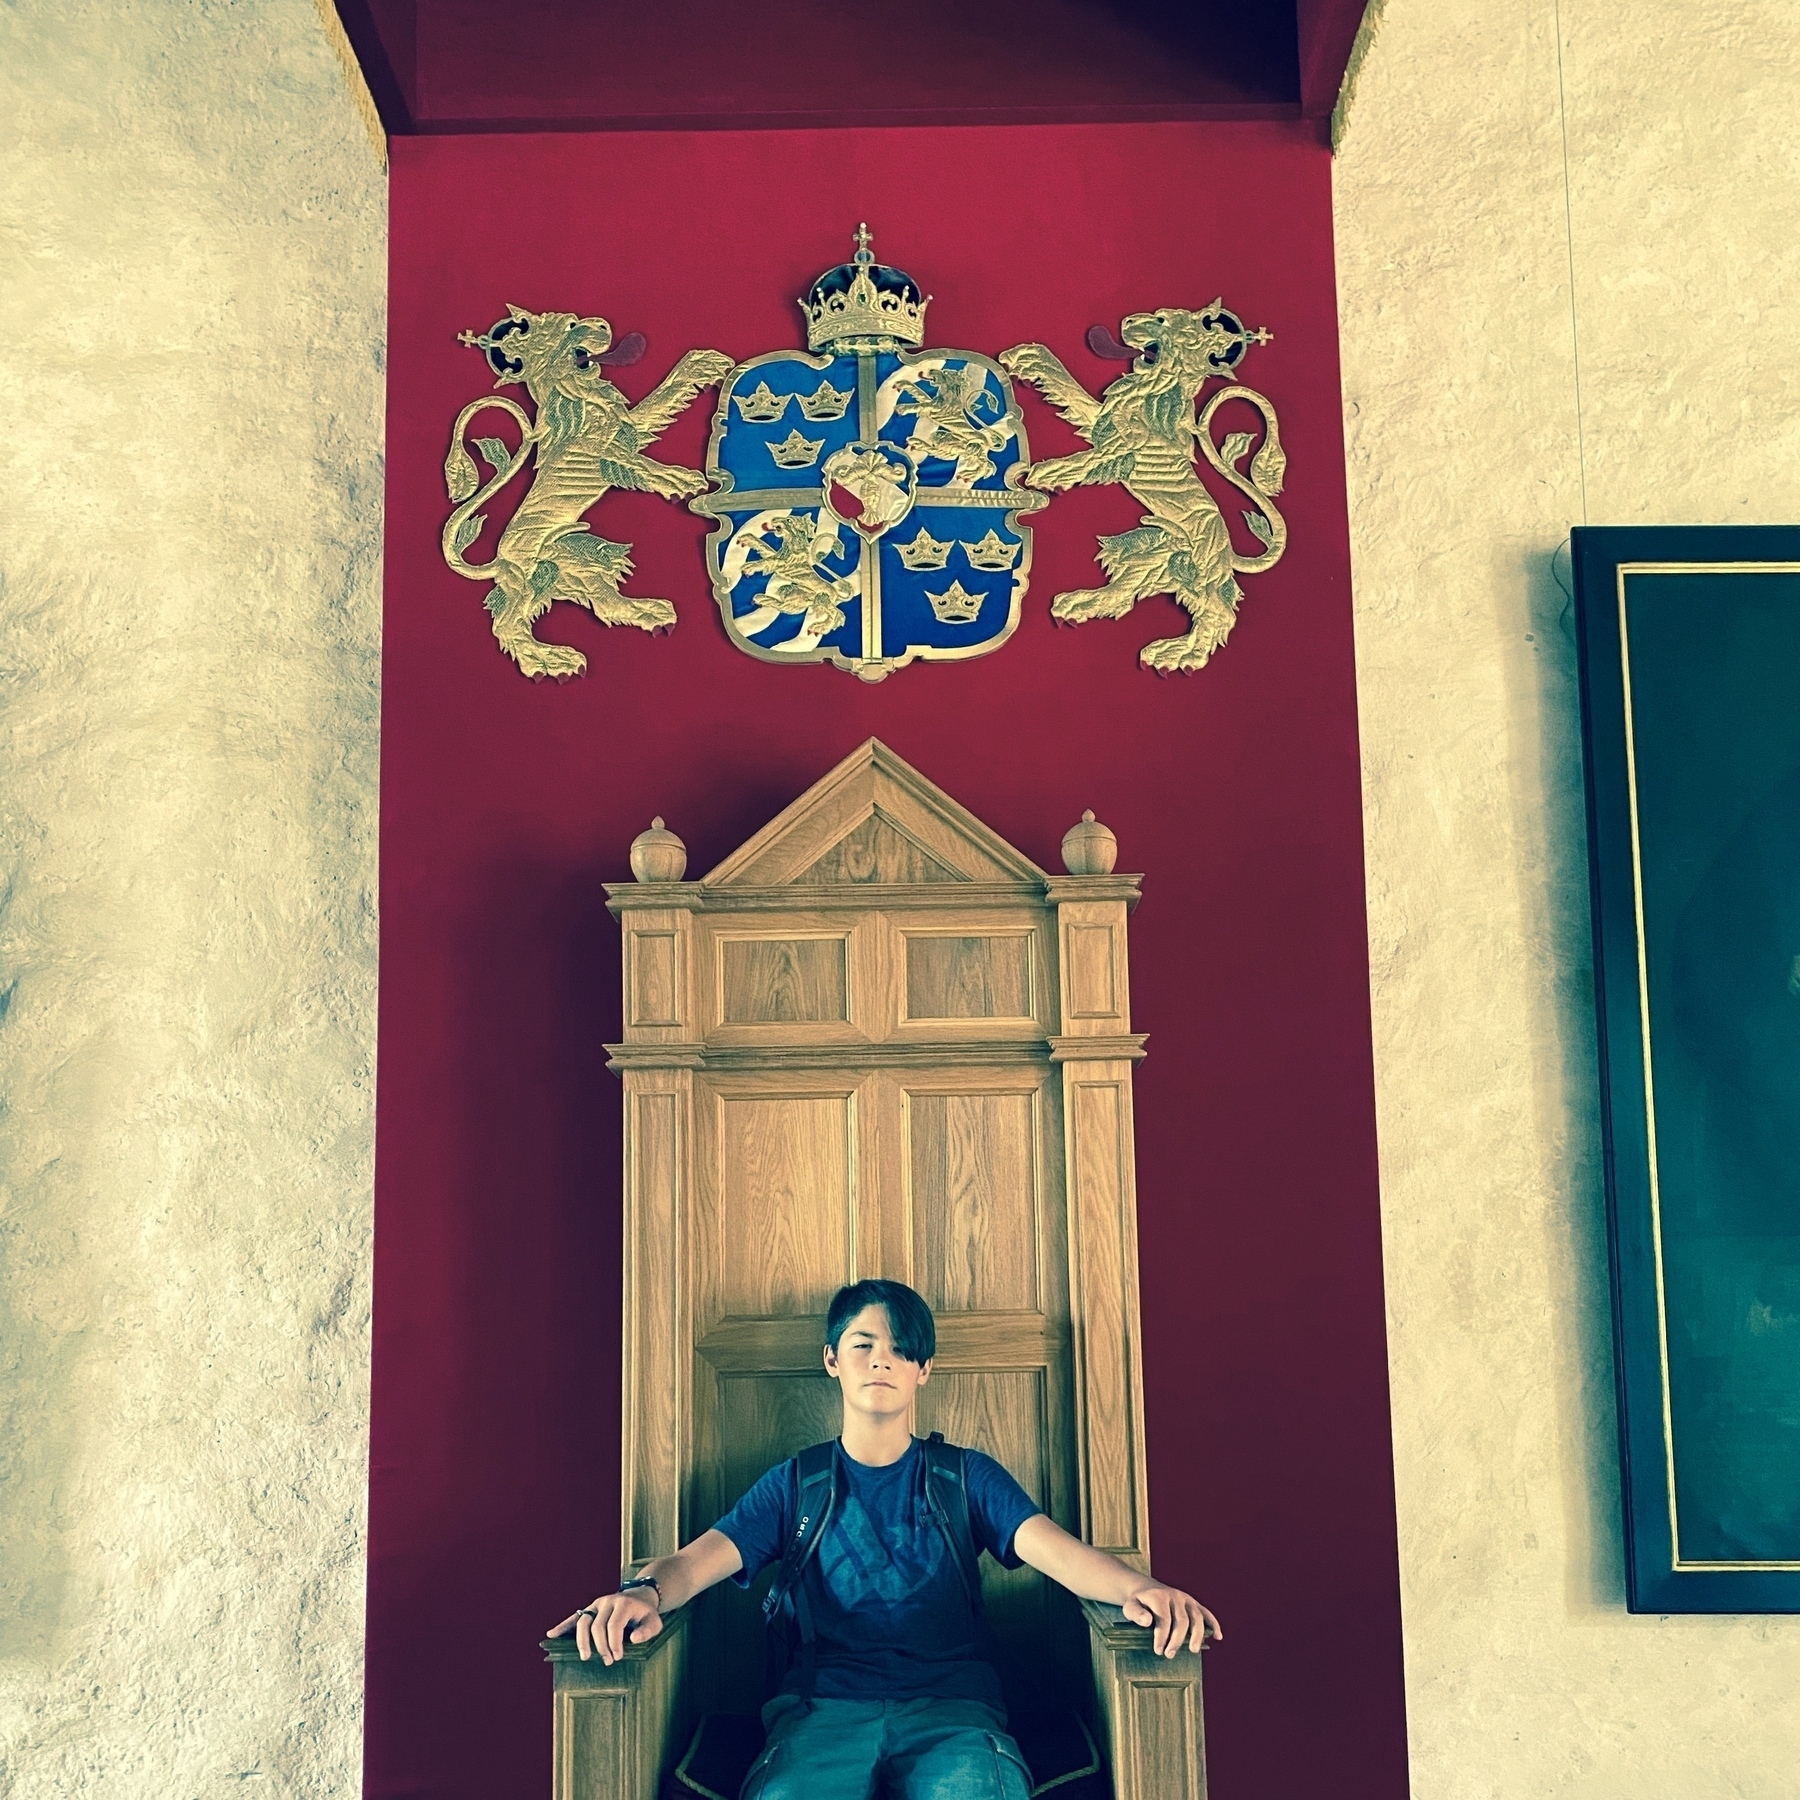 me on a throne being bery dramatic